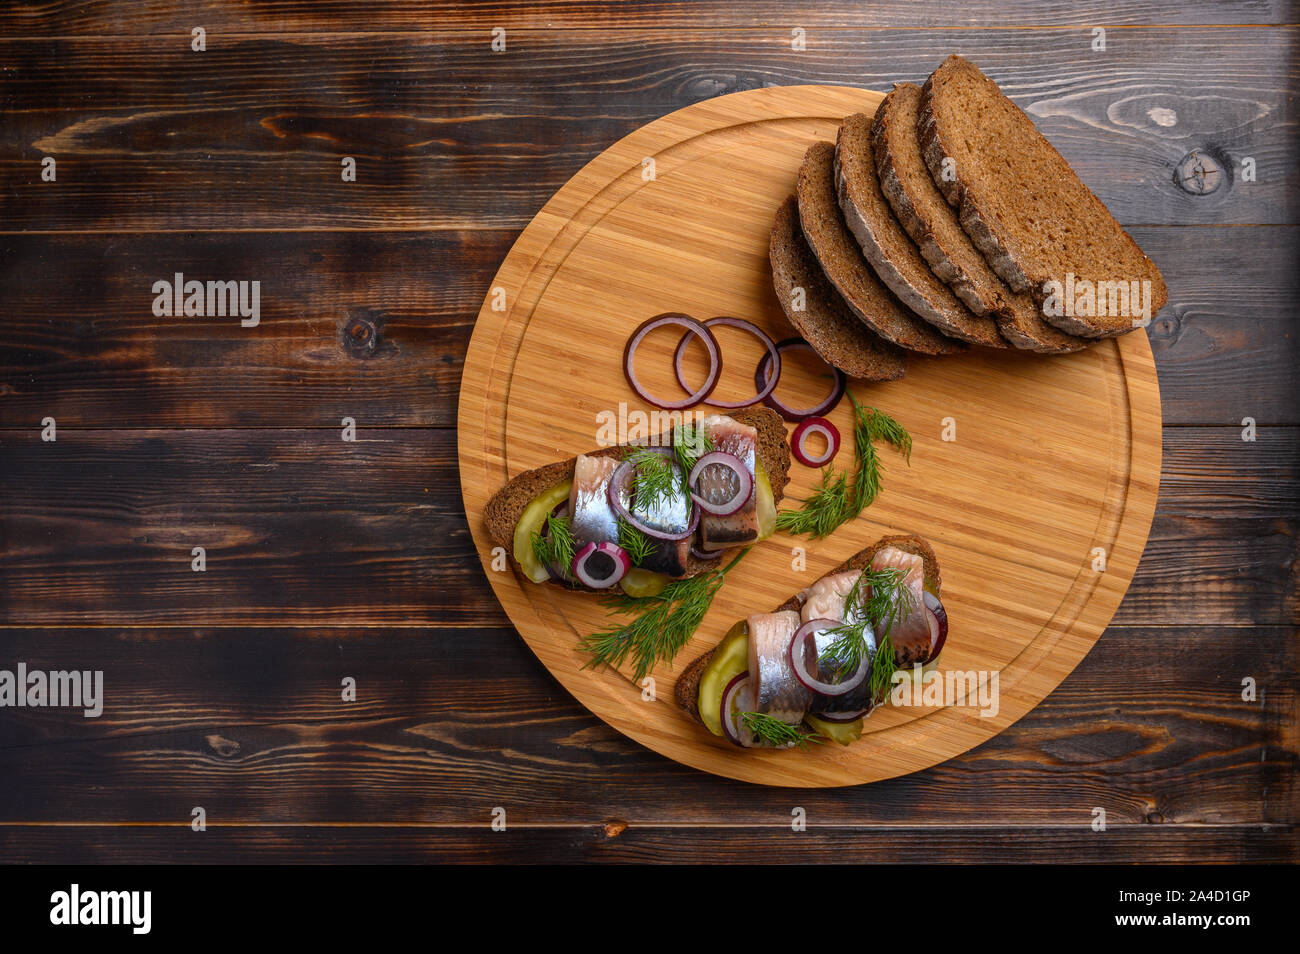 Nop view traditional Russian snack-sandwich with herring, bread and onions Stock Photo